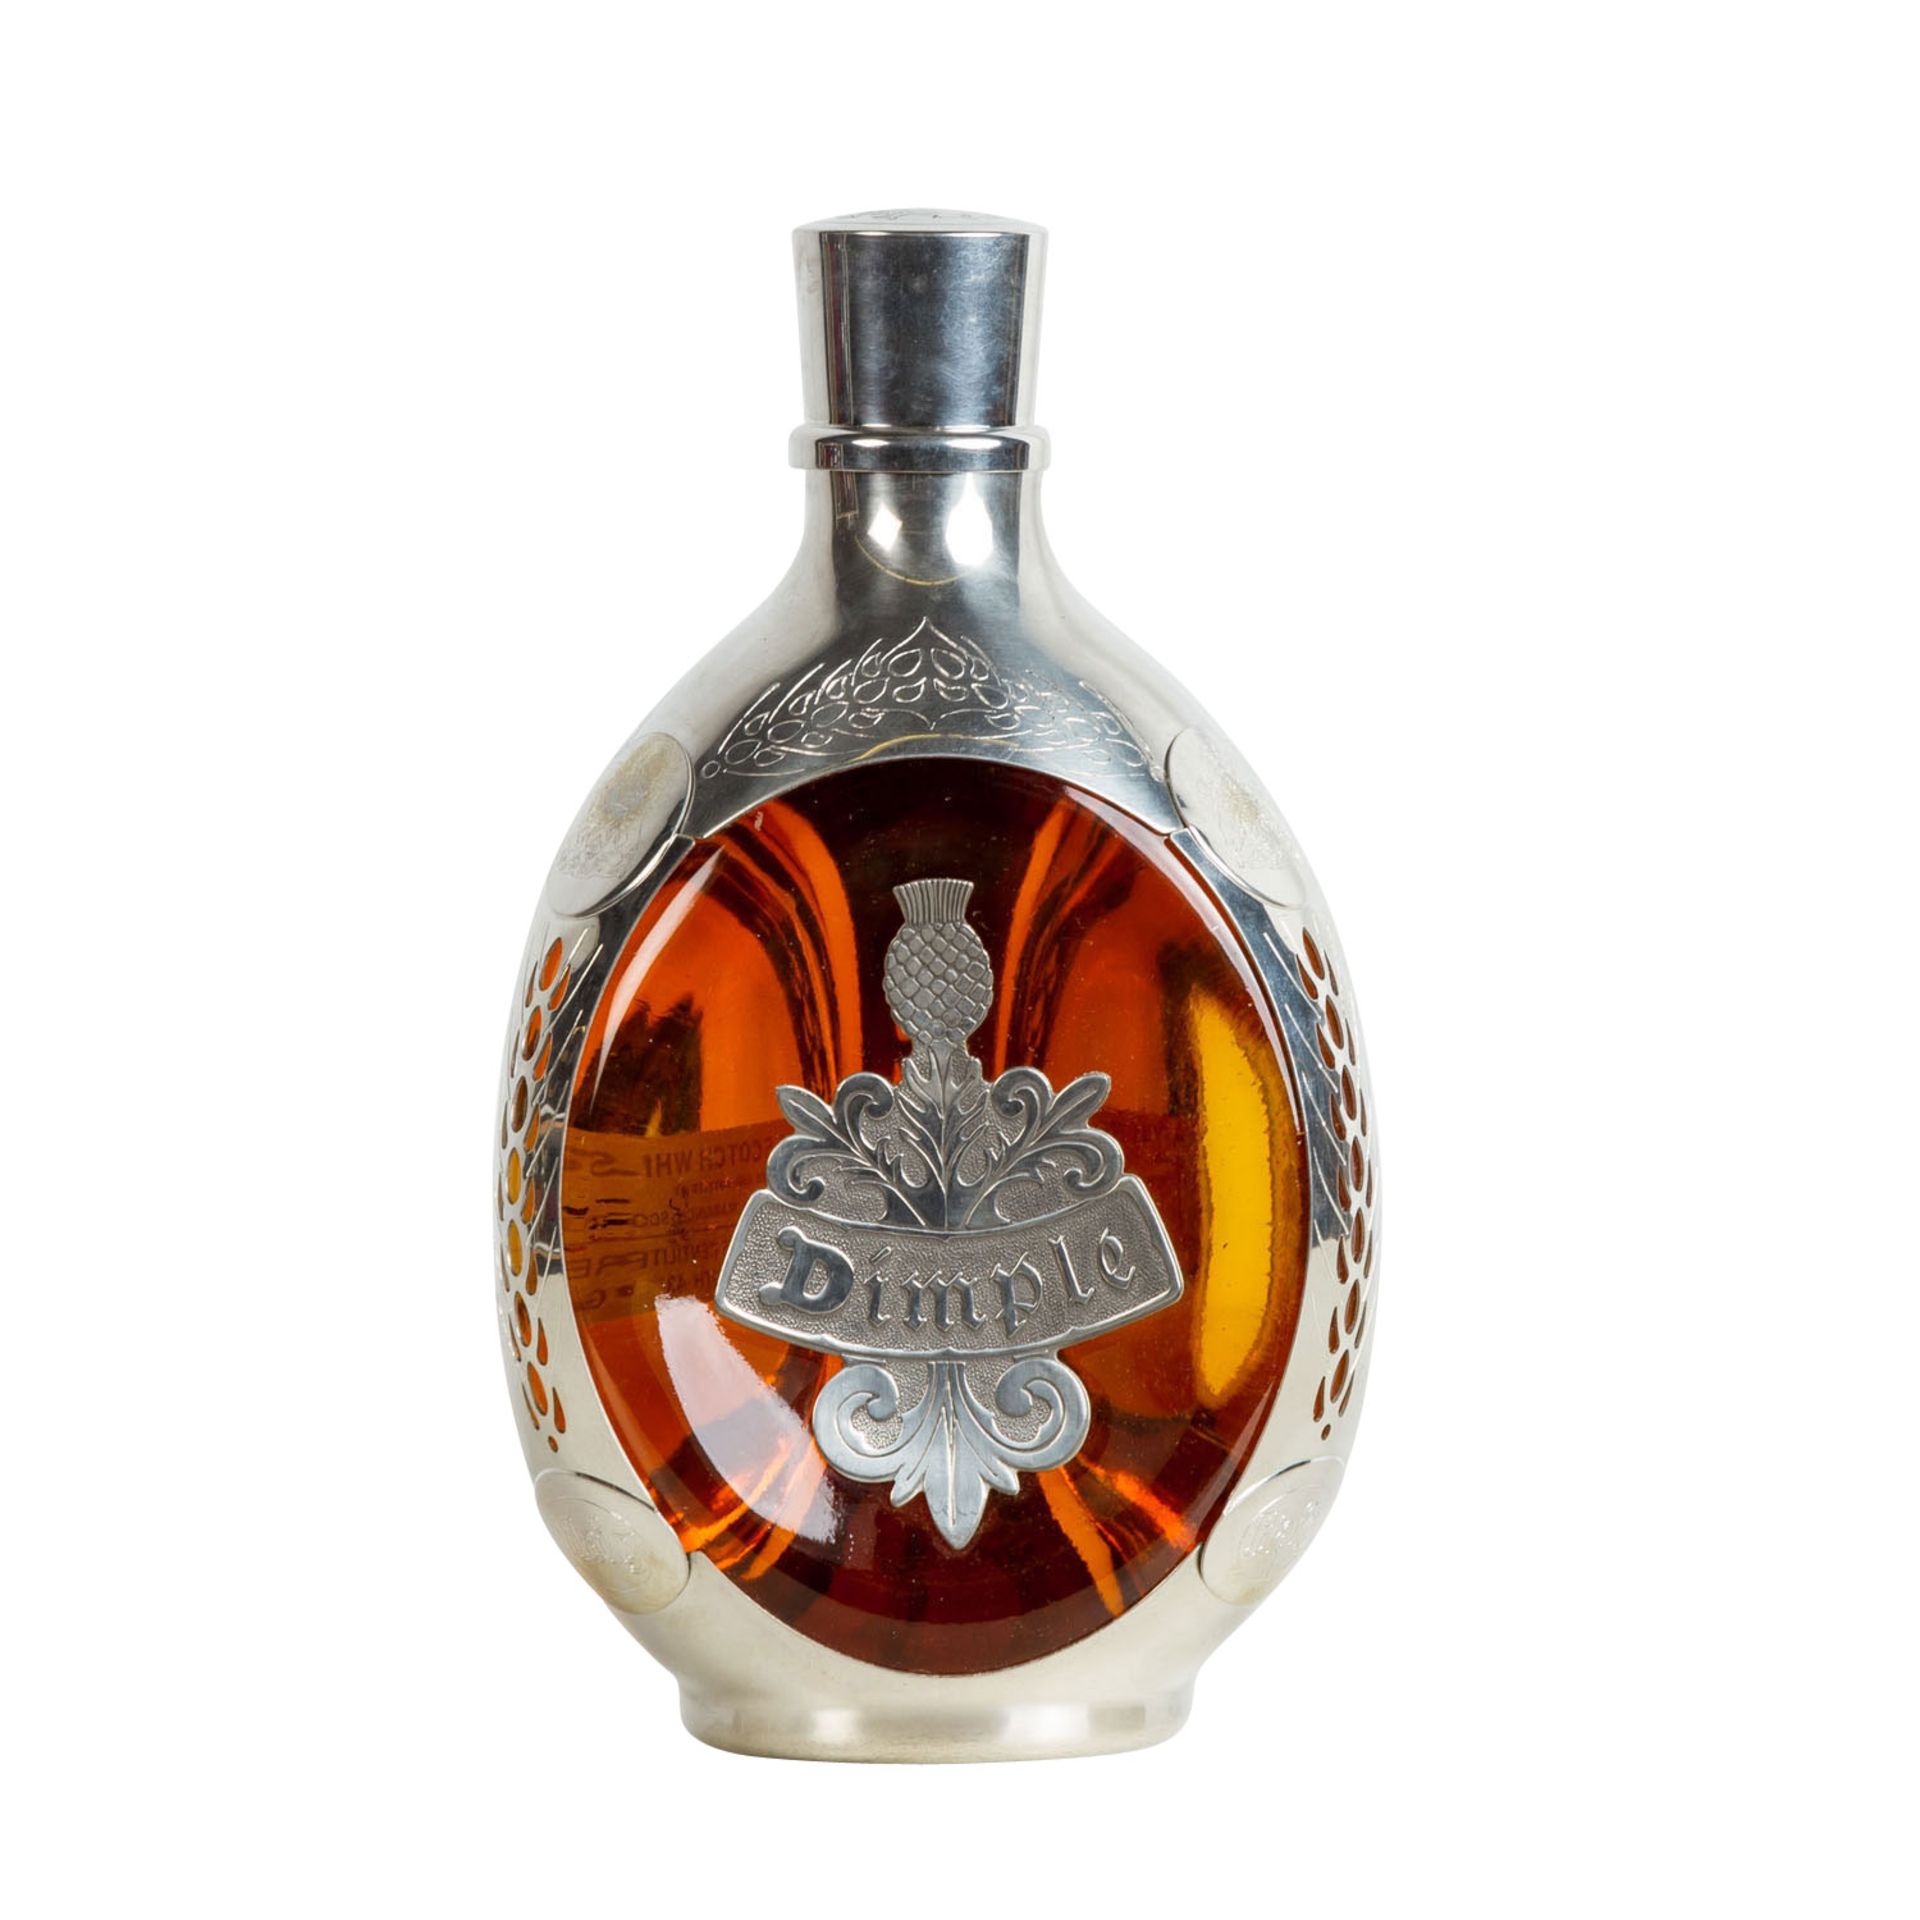 DIMPLE Blended Scotch Whisky 'Royal Decanter',Region: Lowlands, 43% Vol., 750ml, in Original